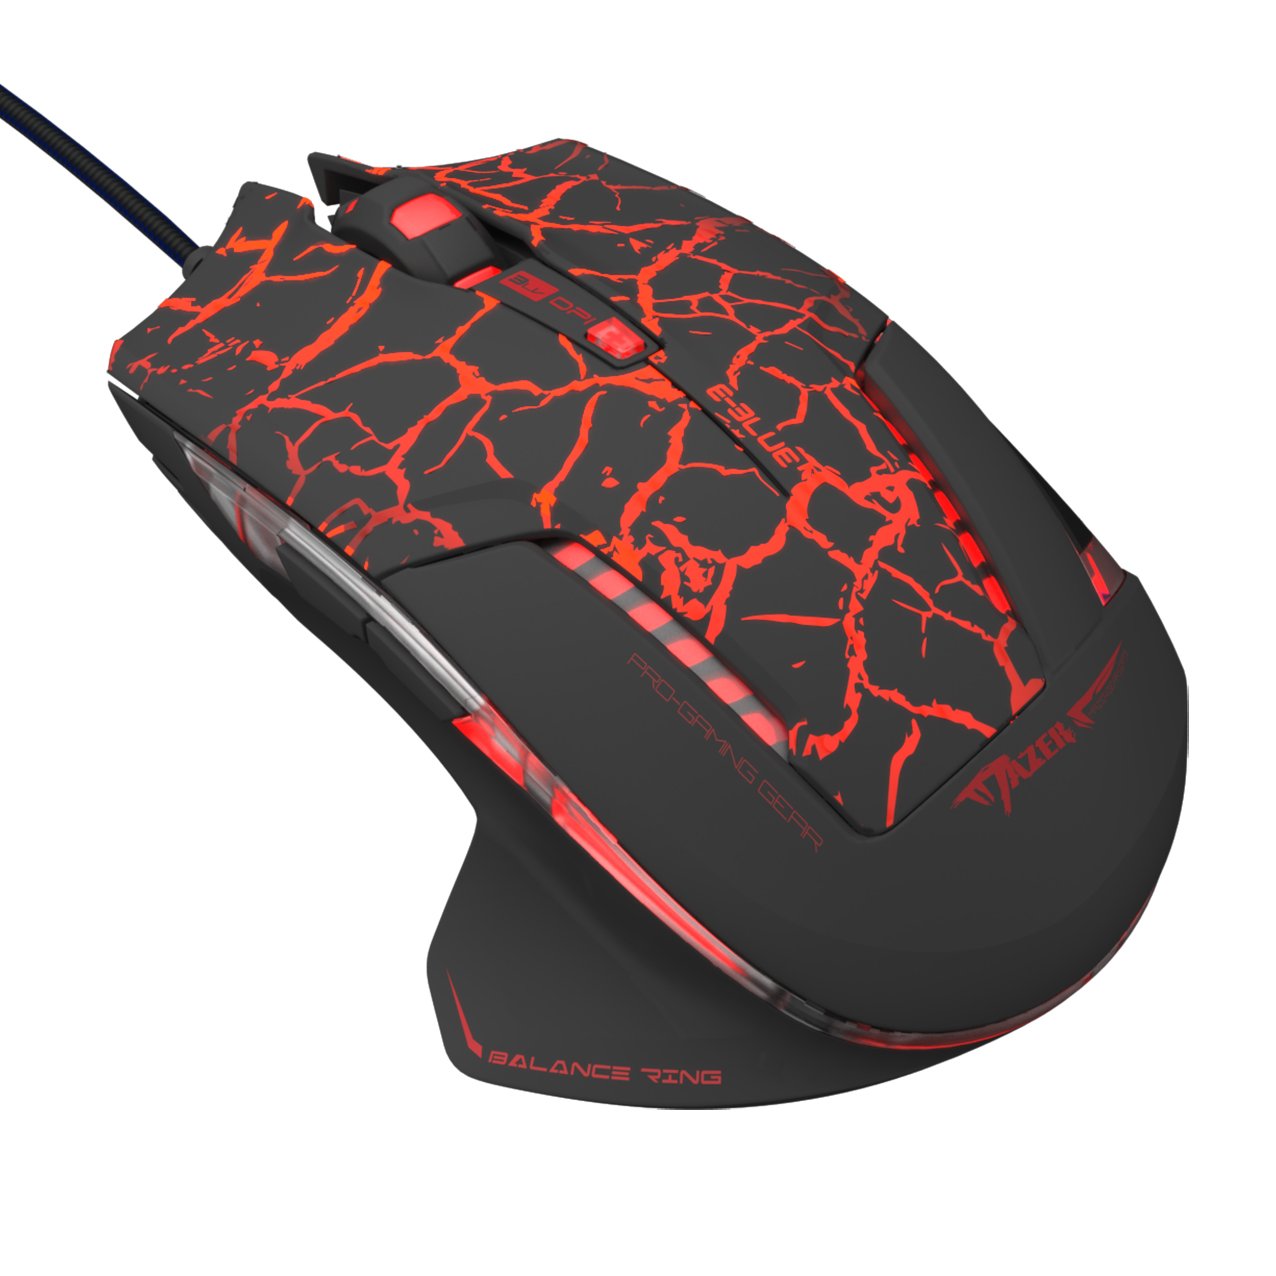 E-Blue EMS600 Mazer Pro Gaming Mouse with Additional Buttons / 2500 DPI / Avago Chipset / USB / Black